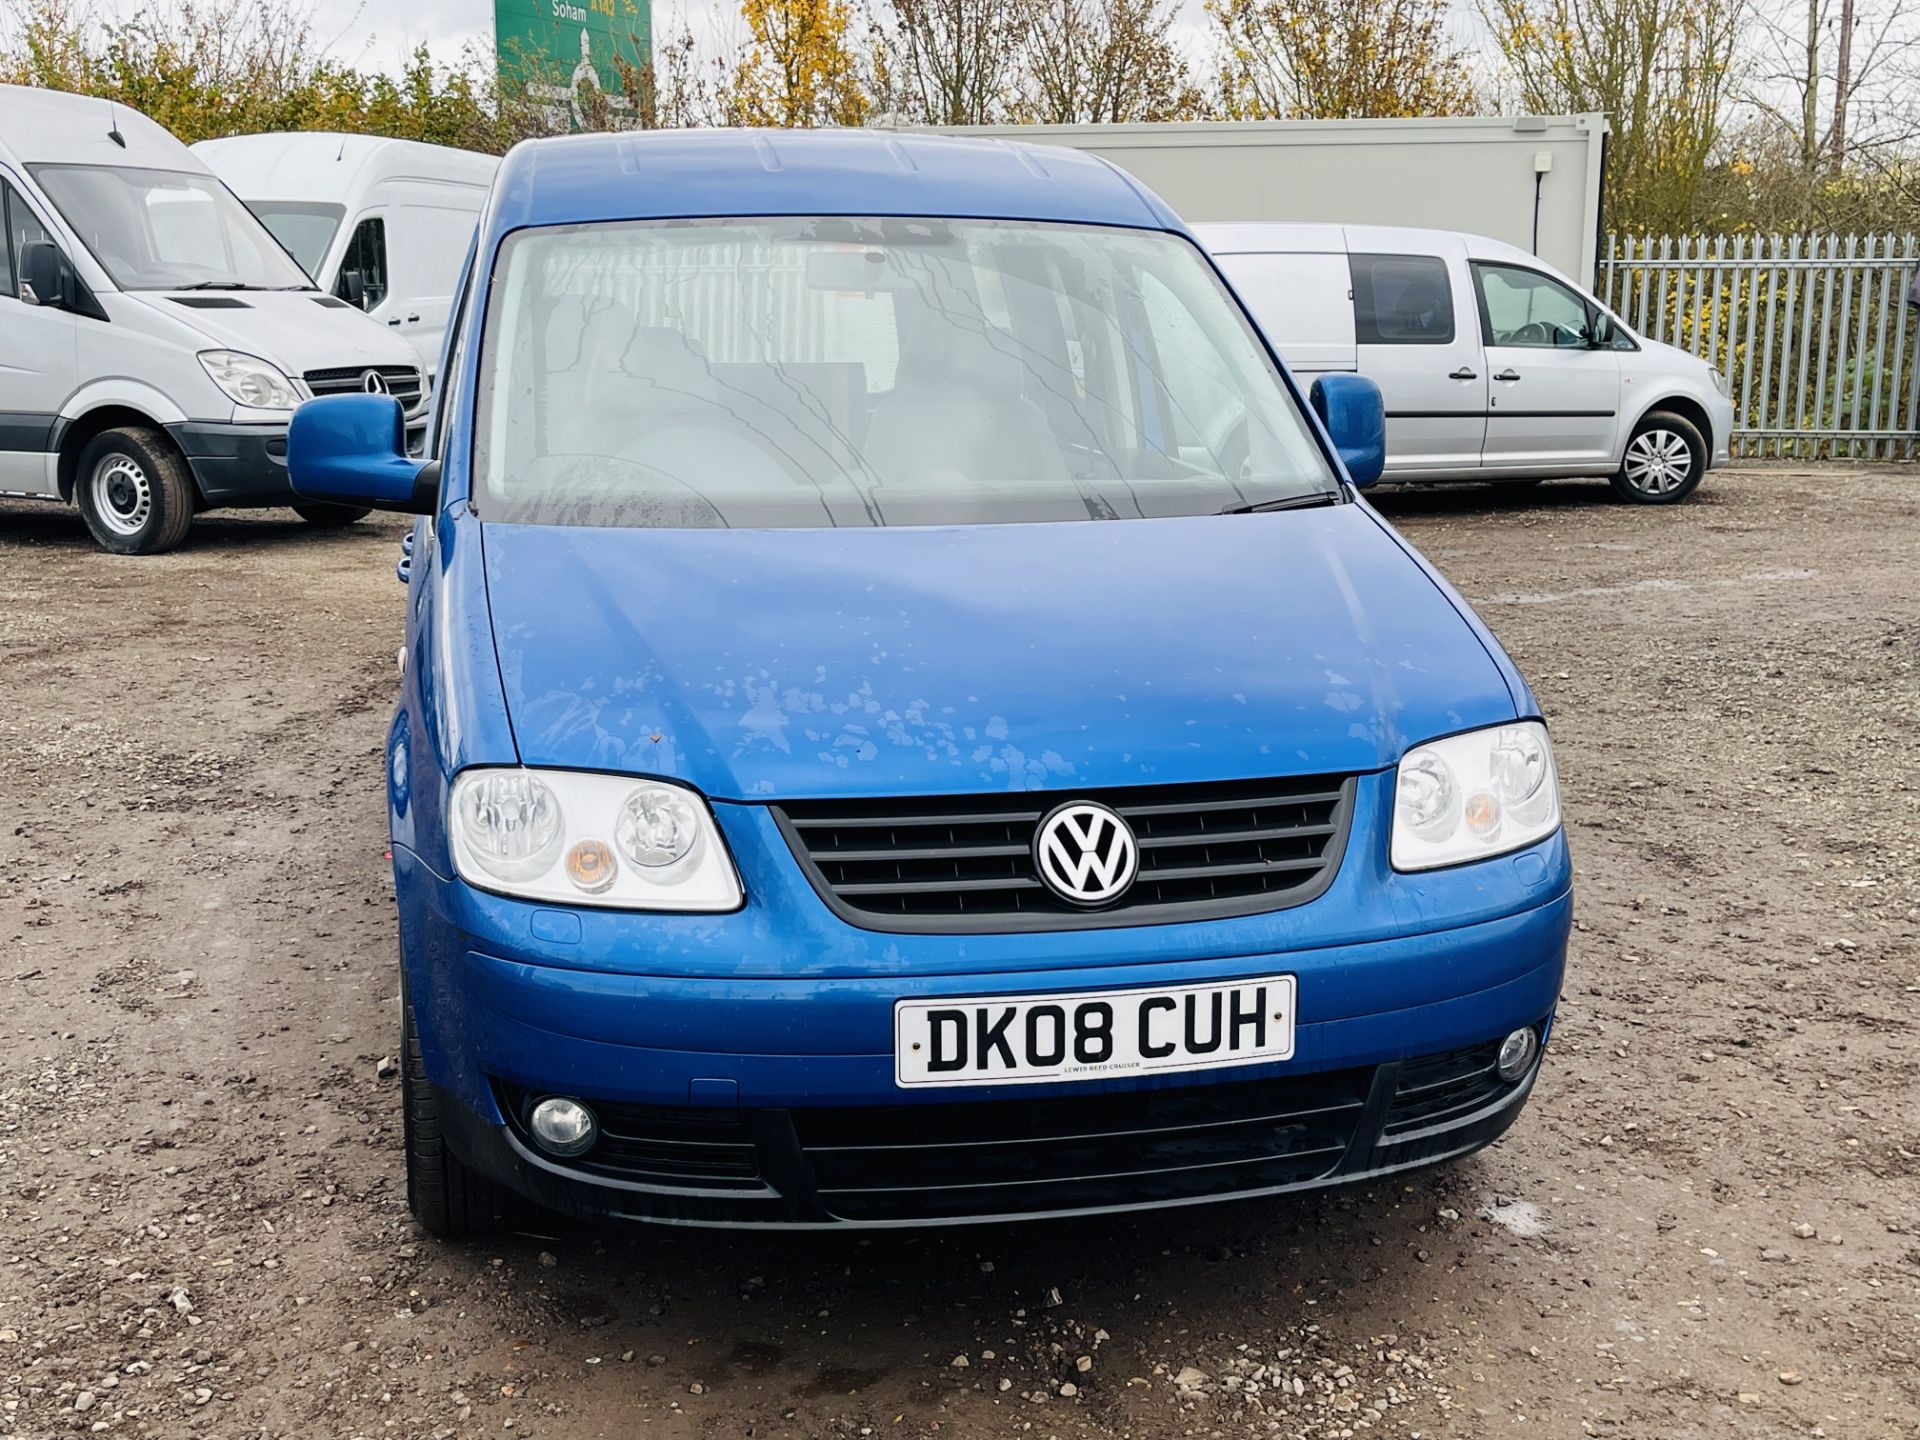 ** ON SALE ** Volkswagen Caddy Life 1.9 TDI DSG Auto 2008 '08 Reg'Air Con - Only Done 38k - - Image 3 of 24